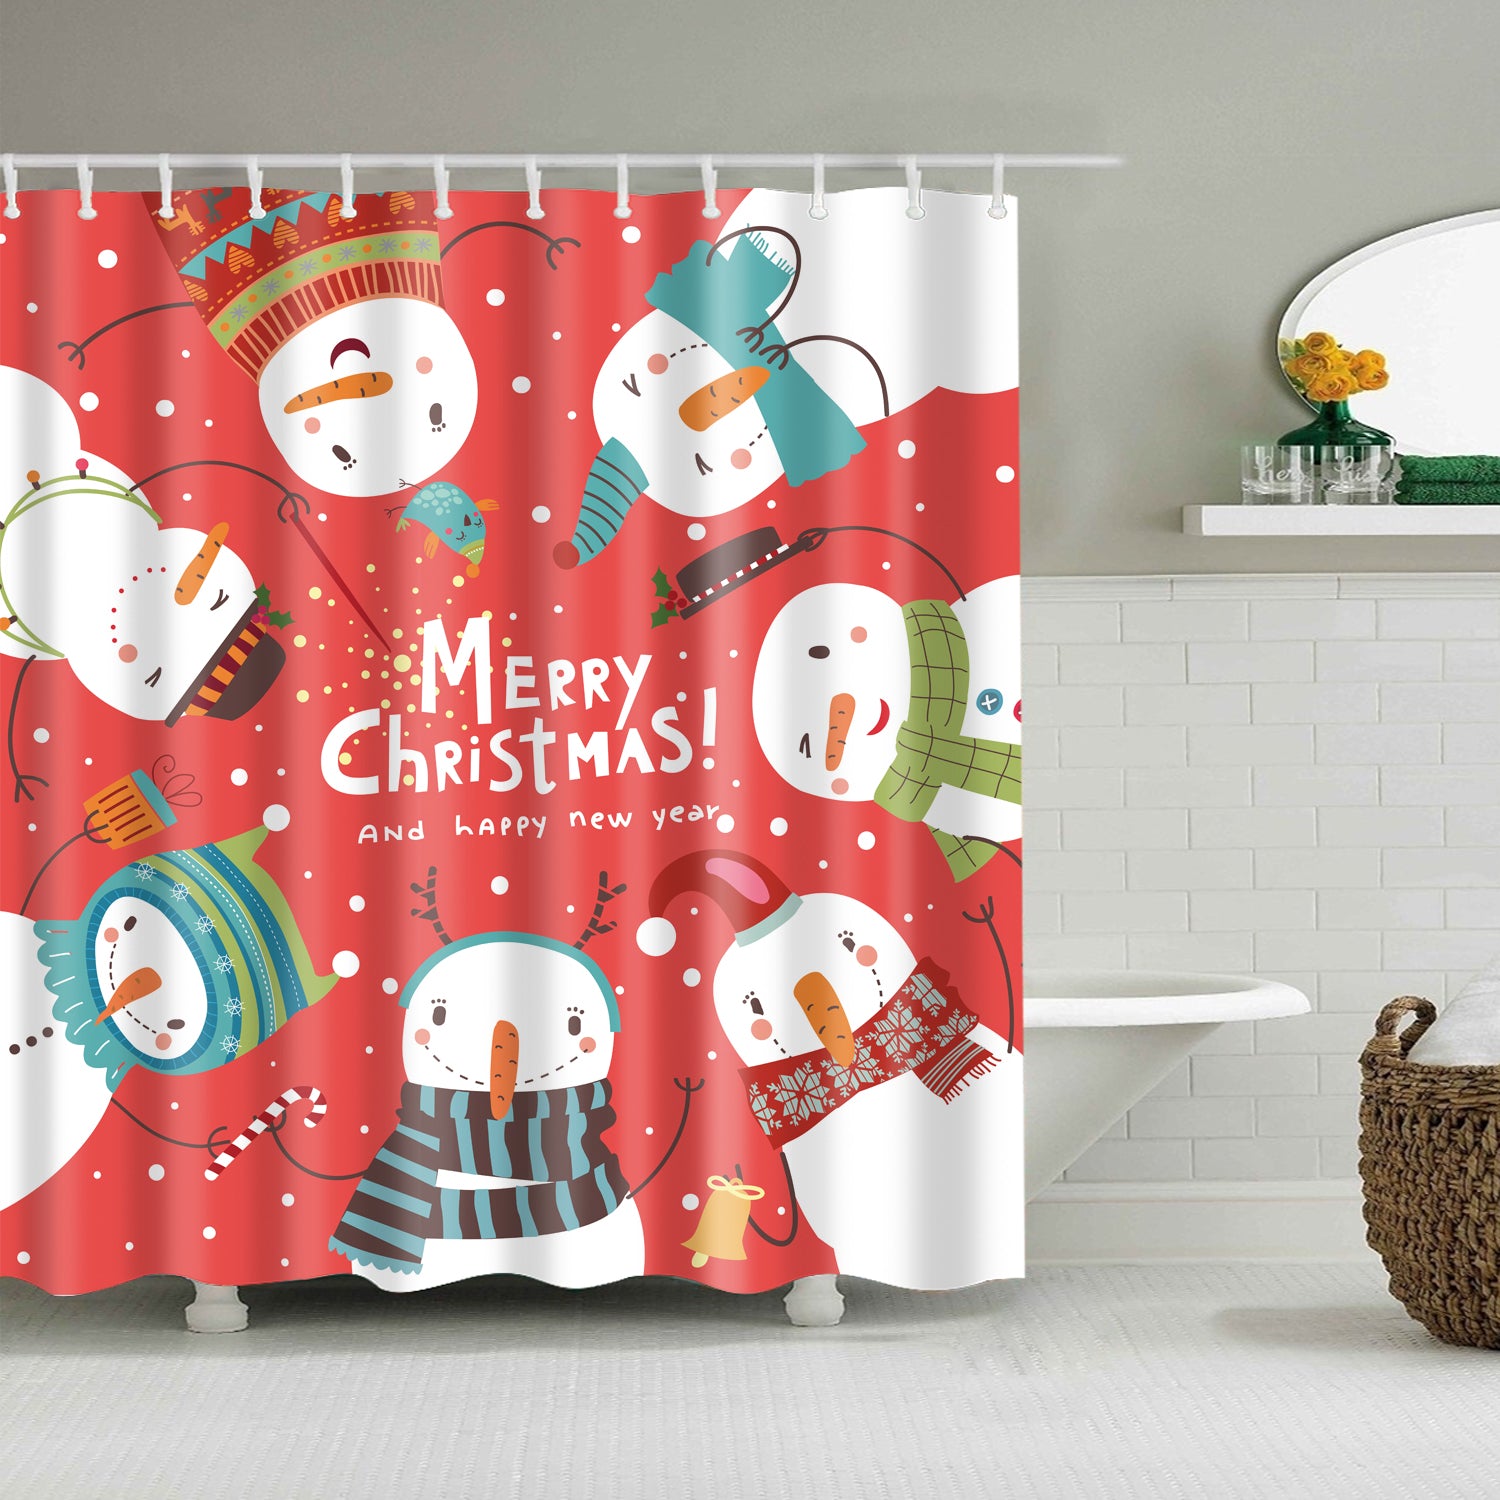 Six Different Snowman Happy Holiday Shower Curtain